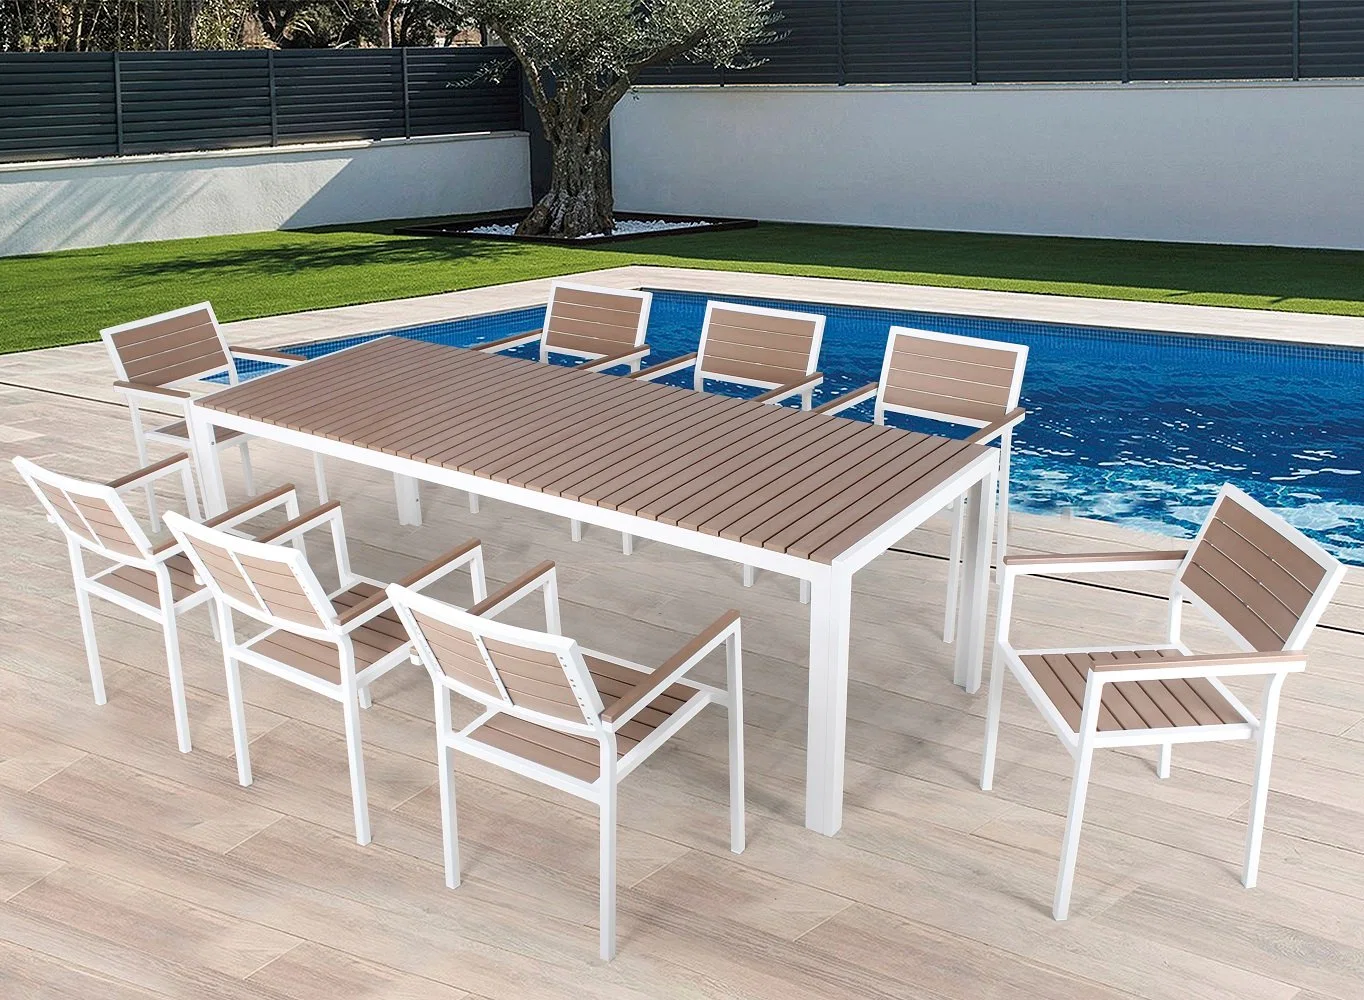 Hot Sale Outdoor Garden Hotel Restaurant Aluminum Frame Plastic Wood Patio Dining Table Chair Furniture